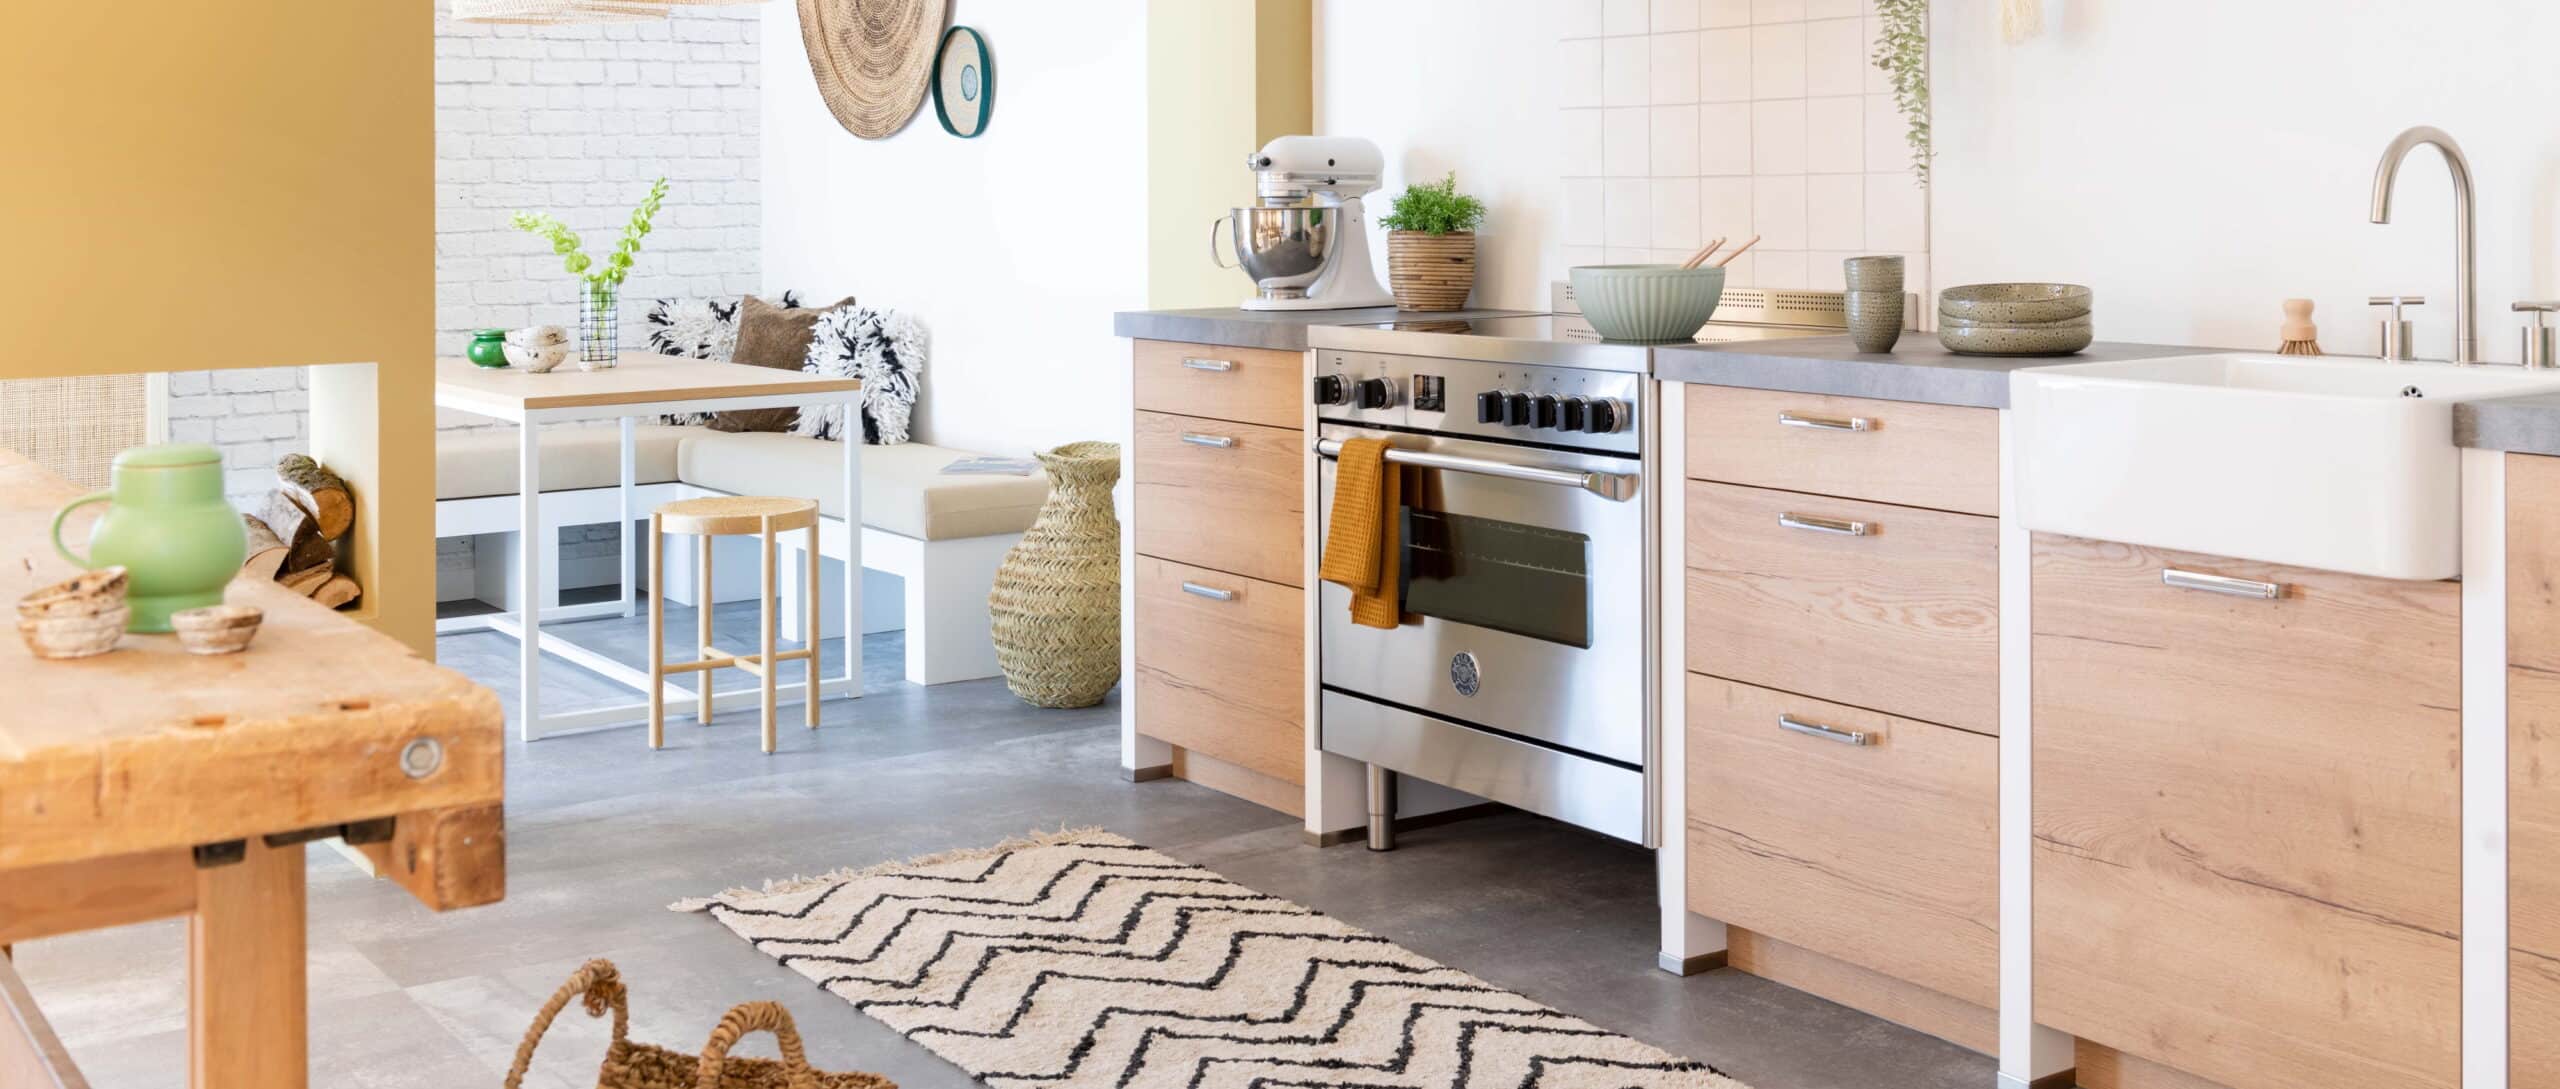 terugvallen West Glimmend Keukencoach blog o.a. houten keuken, houtlook keuken, houten keuken  inspiratie